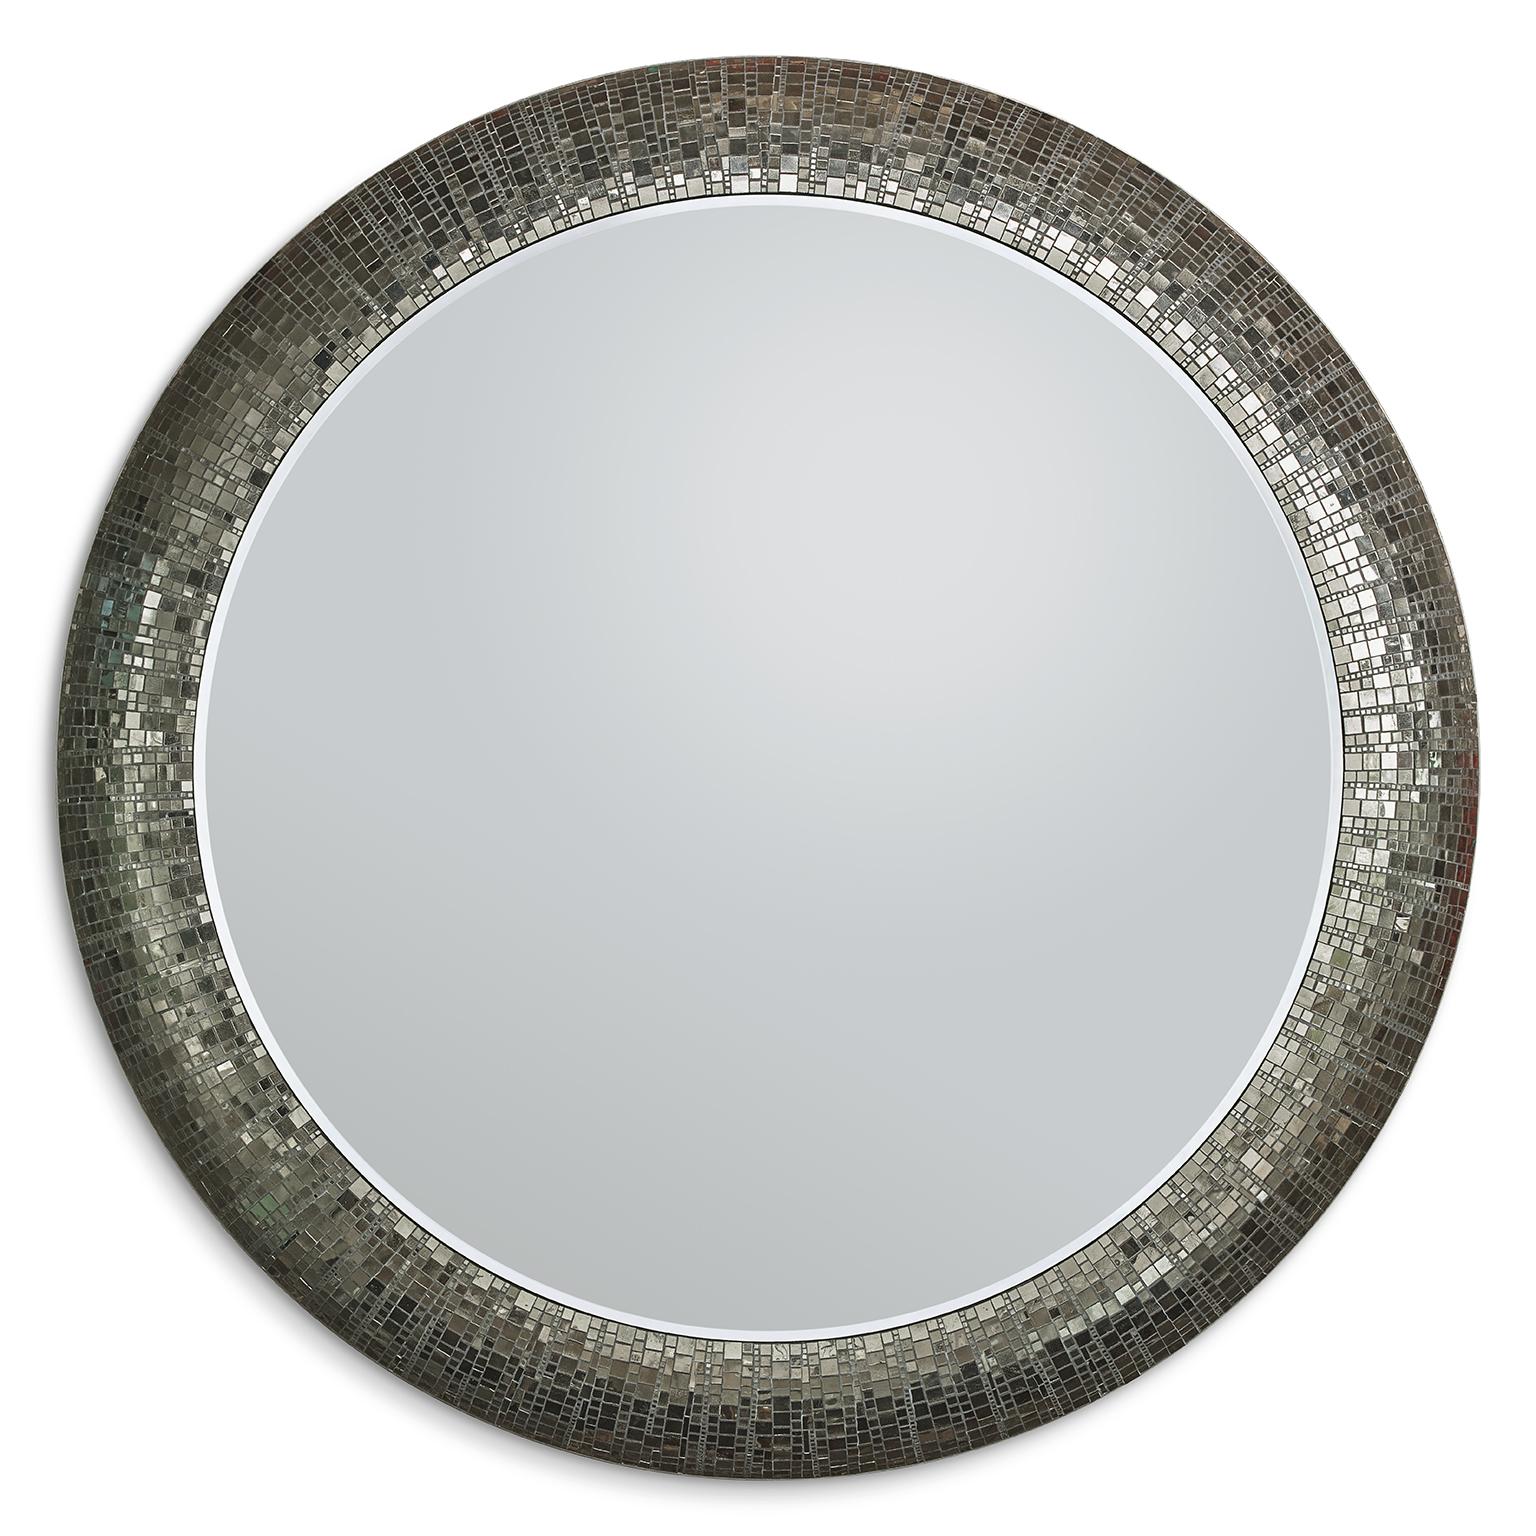 Other Mirror Bronze or Silver Finish and Decorated with Mosaic, LED Backlighting For Sale